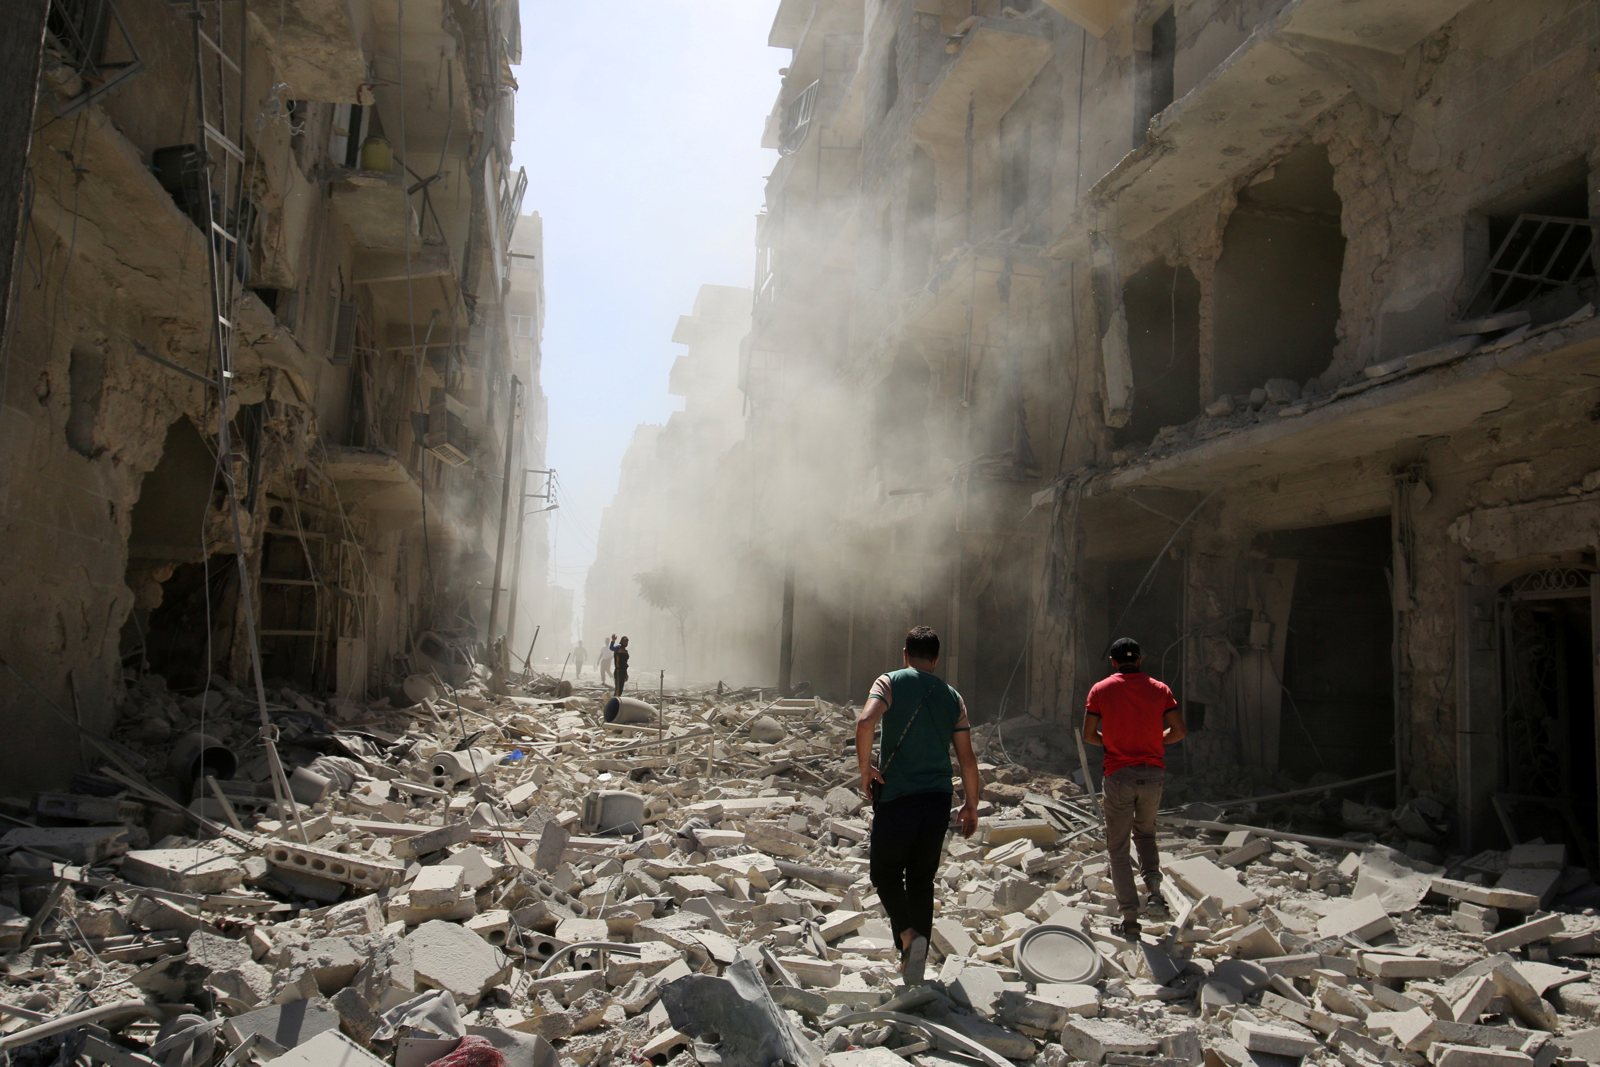 Syrians inspecting the damage after an air strike on the al-Qaterji neighborhood of Aleppo, September 2016